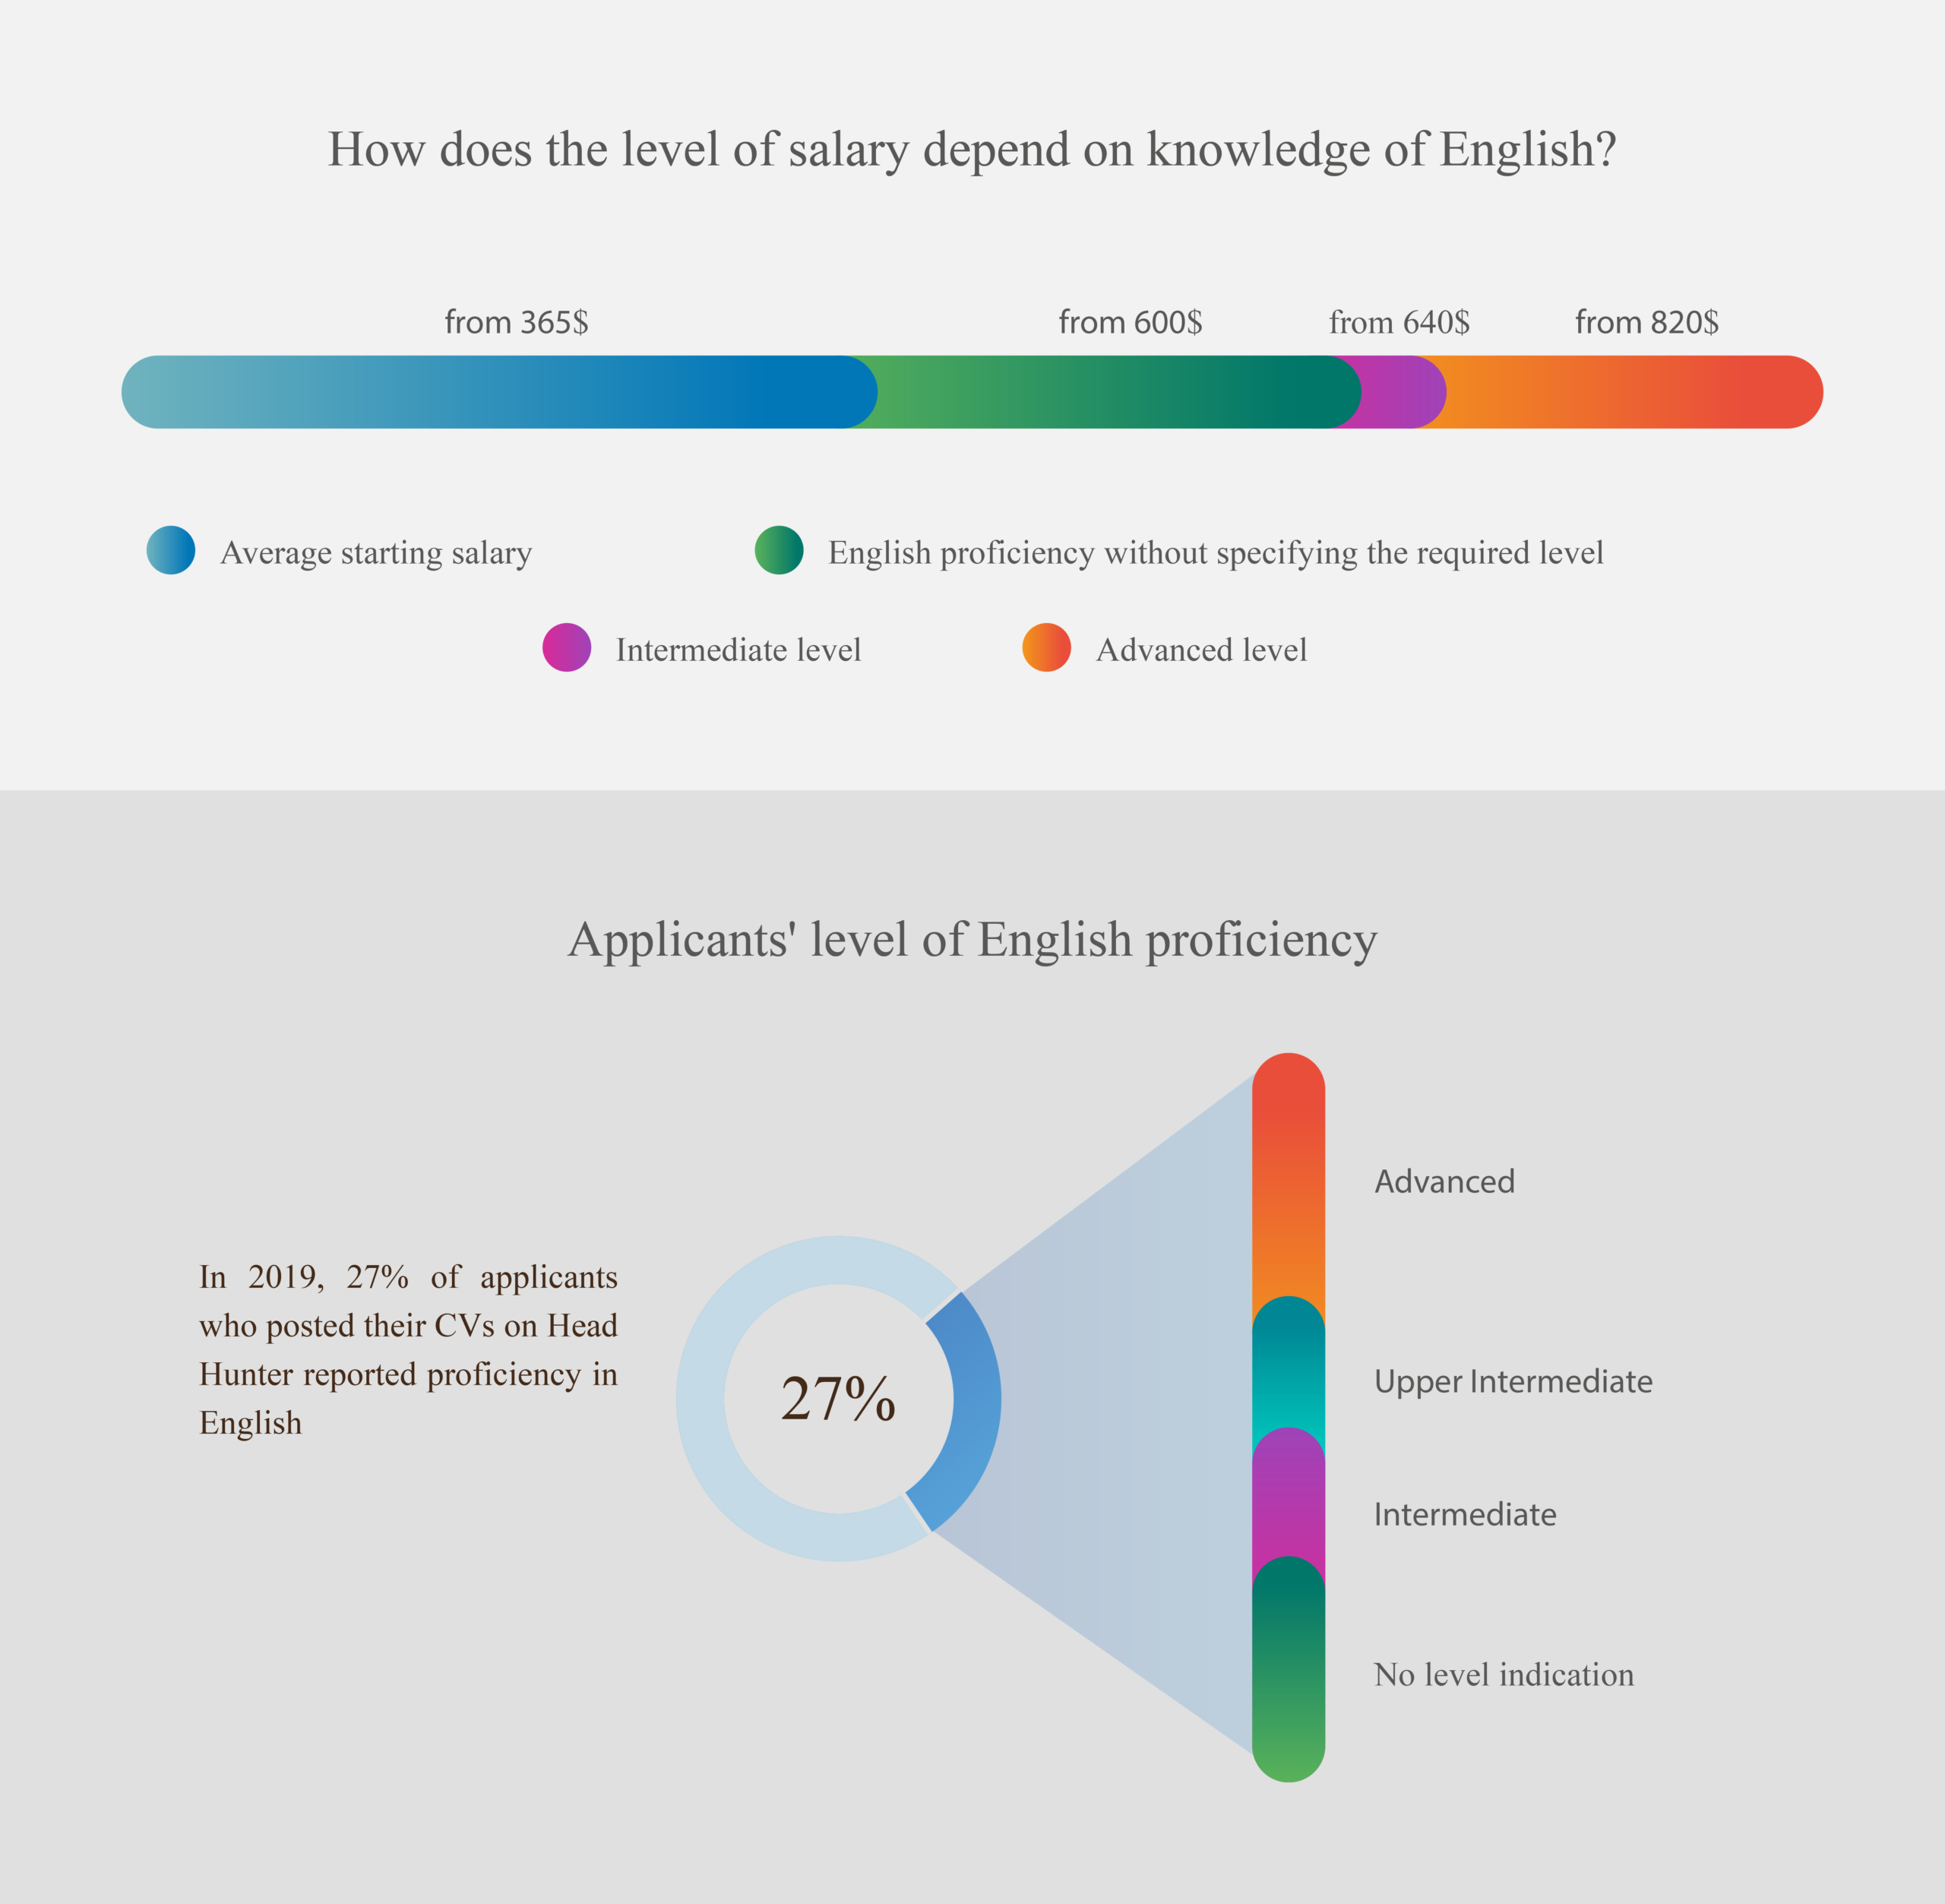 How does knowing the language affect the salary?